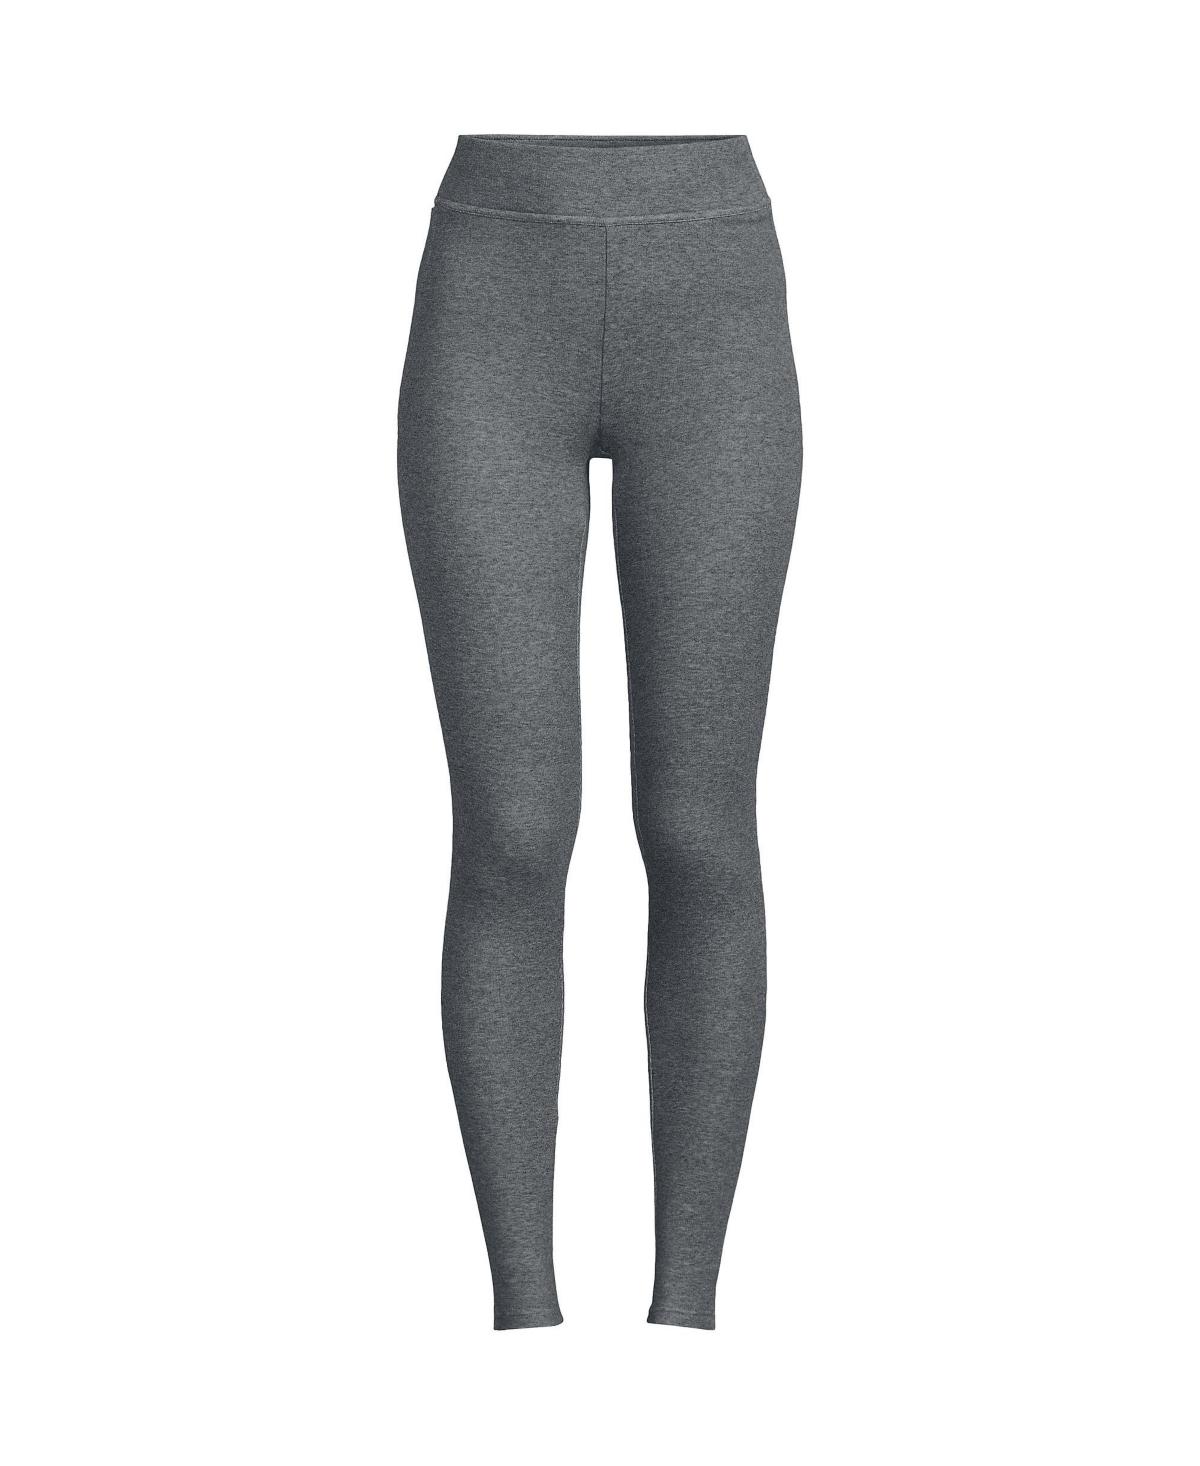 Lands' End Petite High Rise Serious Sweats Fleece Lined Pocket leggings in  Gray